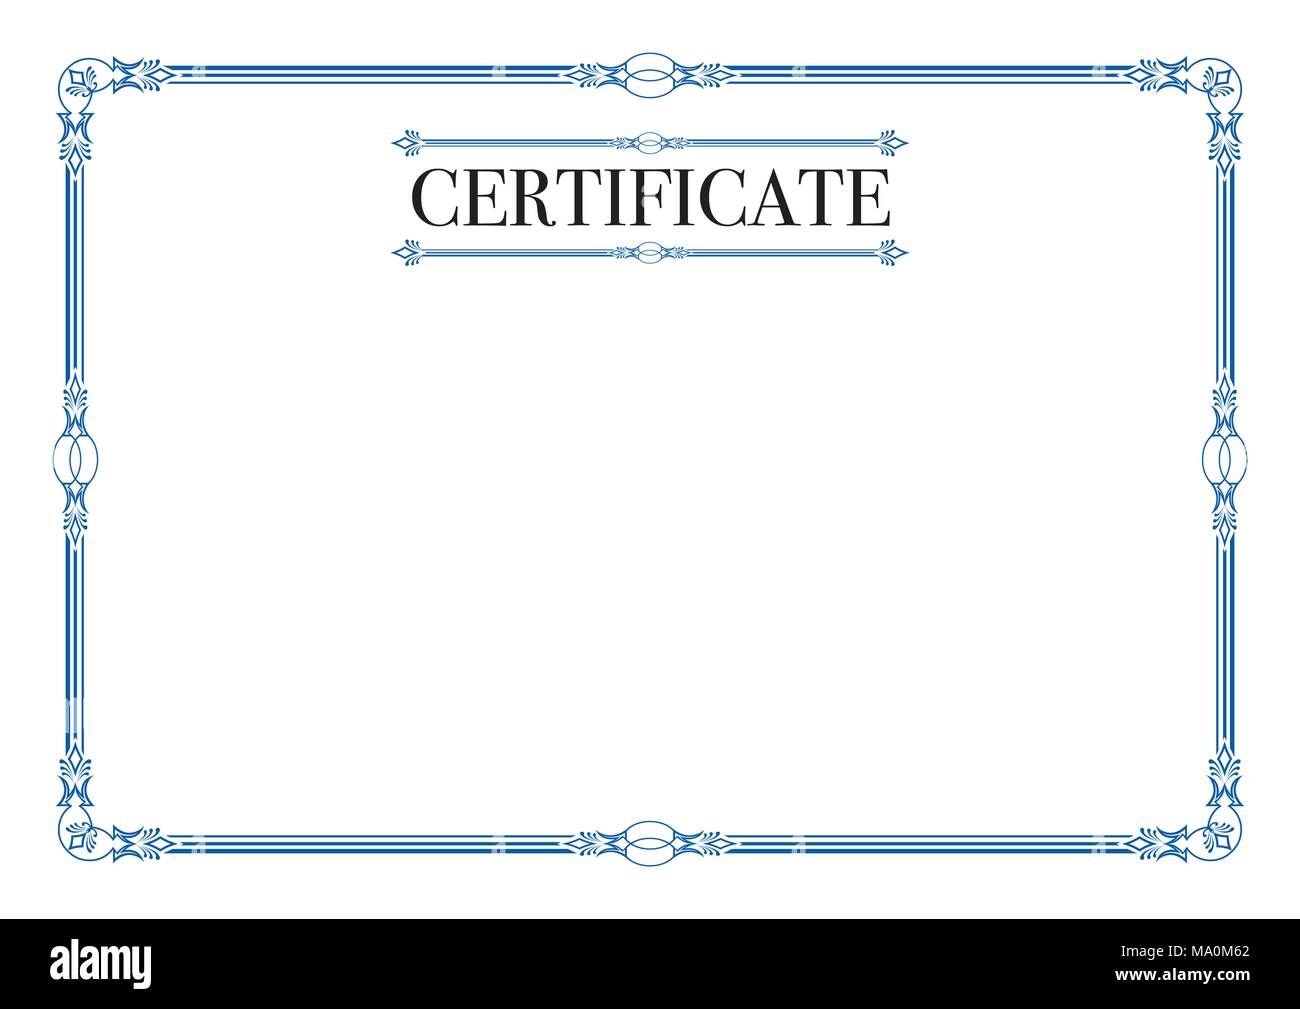 Certificate Border for Excellence Performance Stock Vector